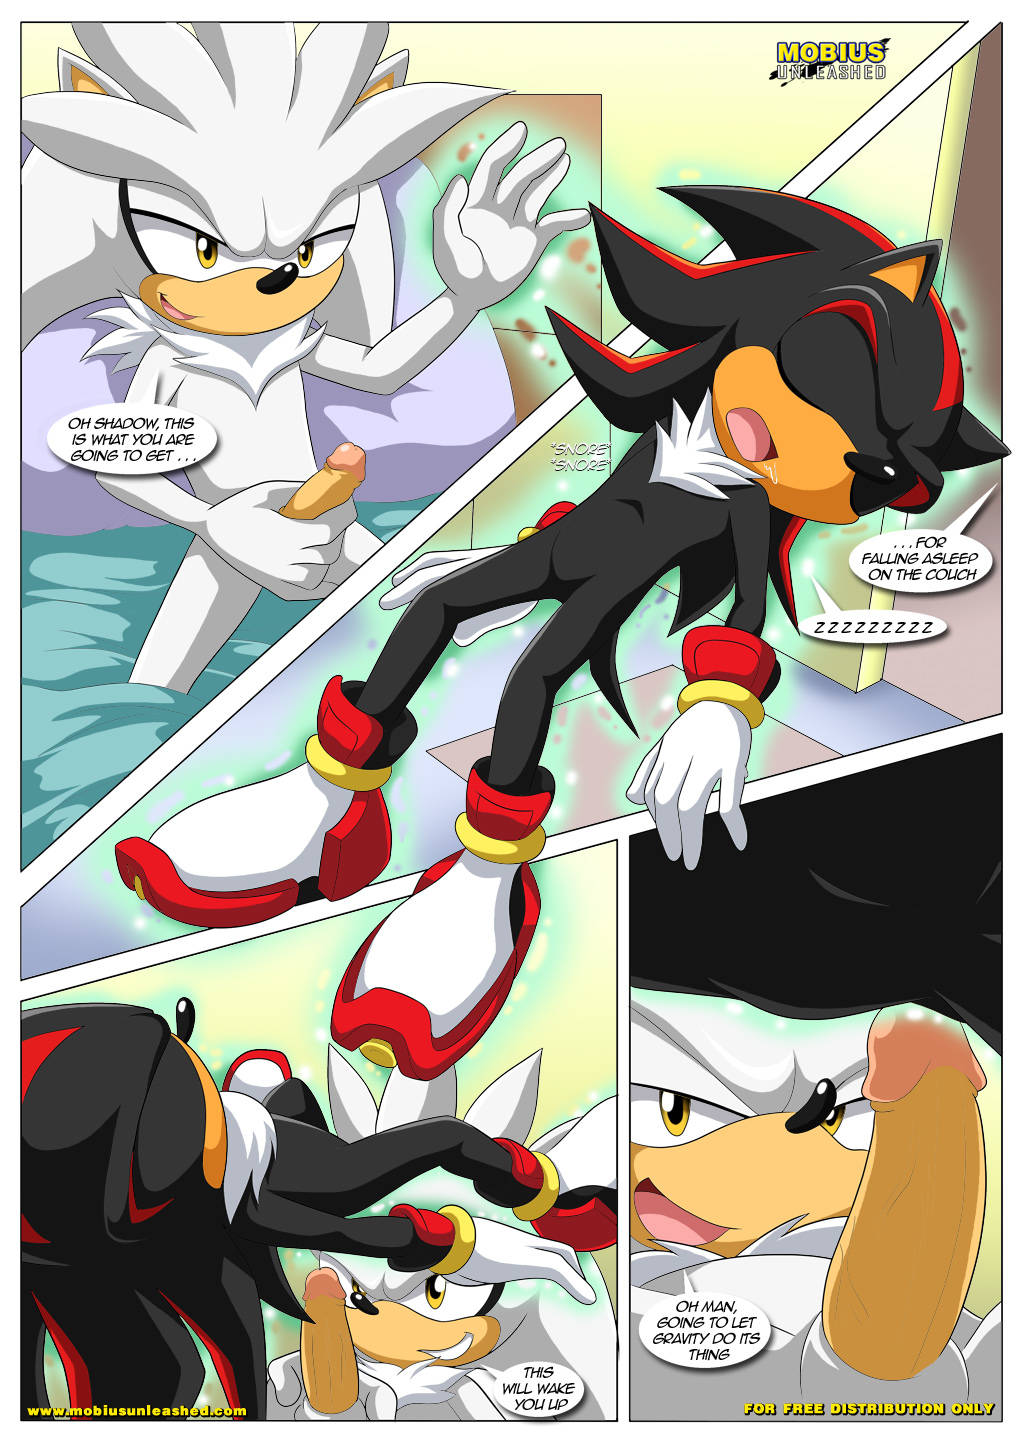 Frisky Levy Hogs (Sonic The Hedgehog) by Palcomix page 2